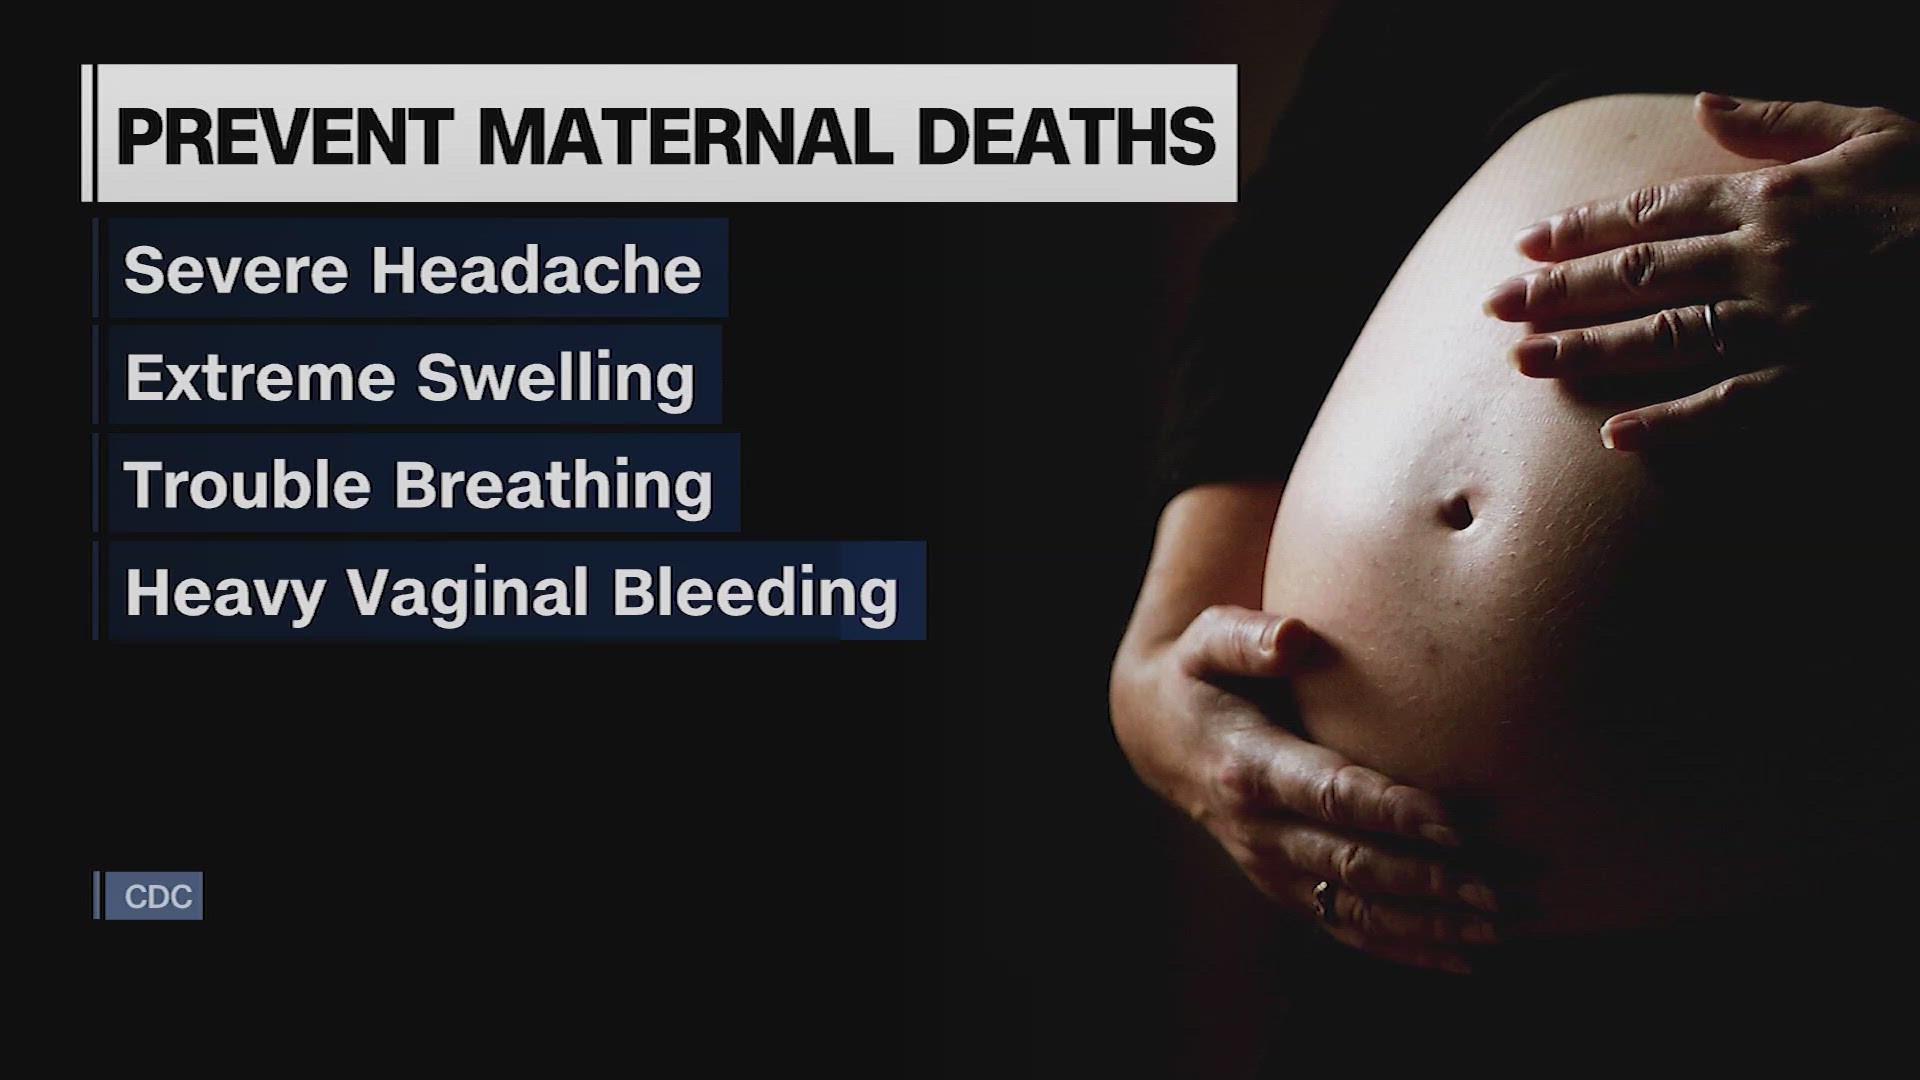 More than 1,200 women died from pregnancy-related issues in the U.S. in 2021.